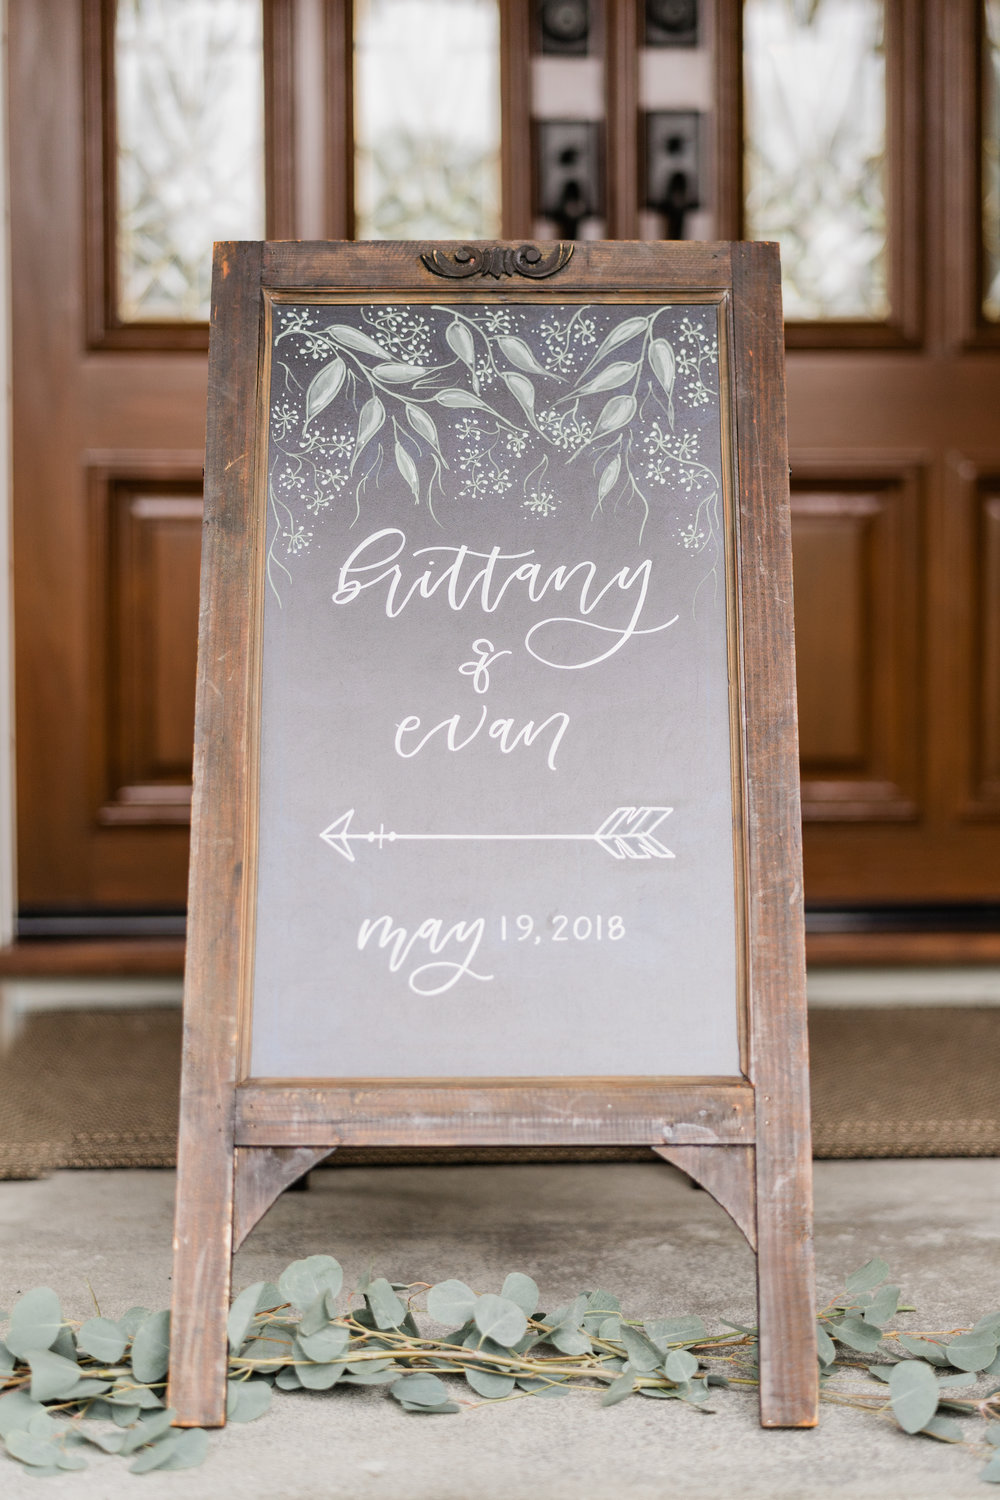 Brittany + Evan - Details - Hitched Photo15.JPG